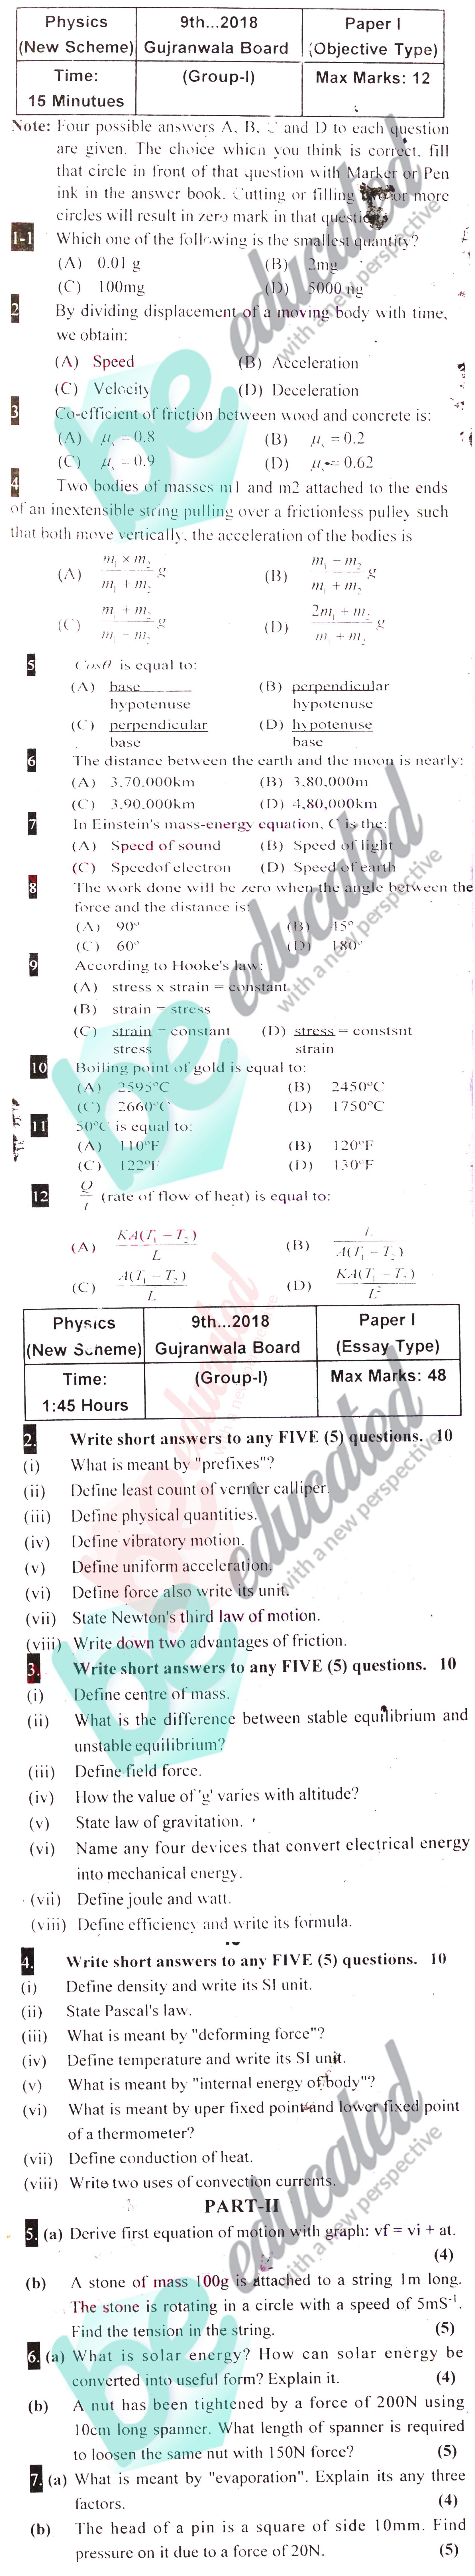 Physics 9th Class English Medium Past Paper Group 1 BISE Gujranwala 2018